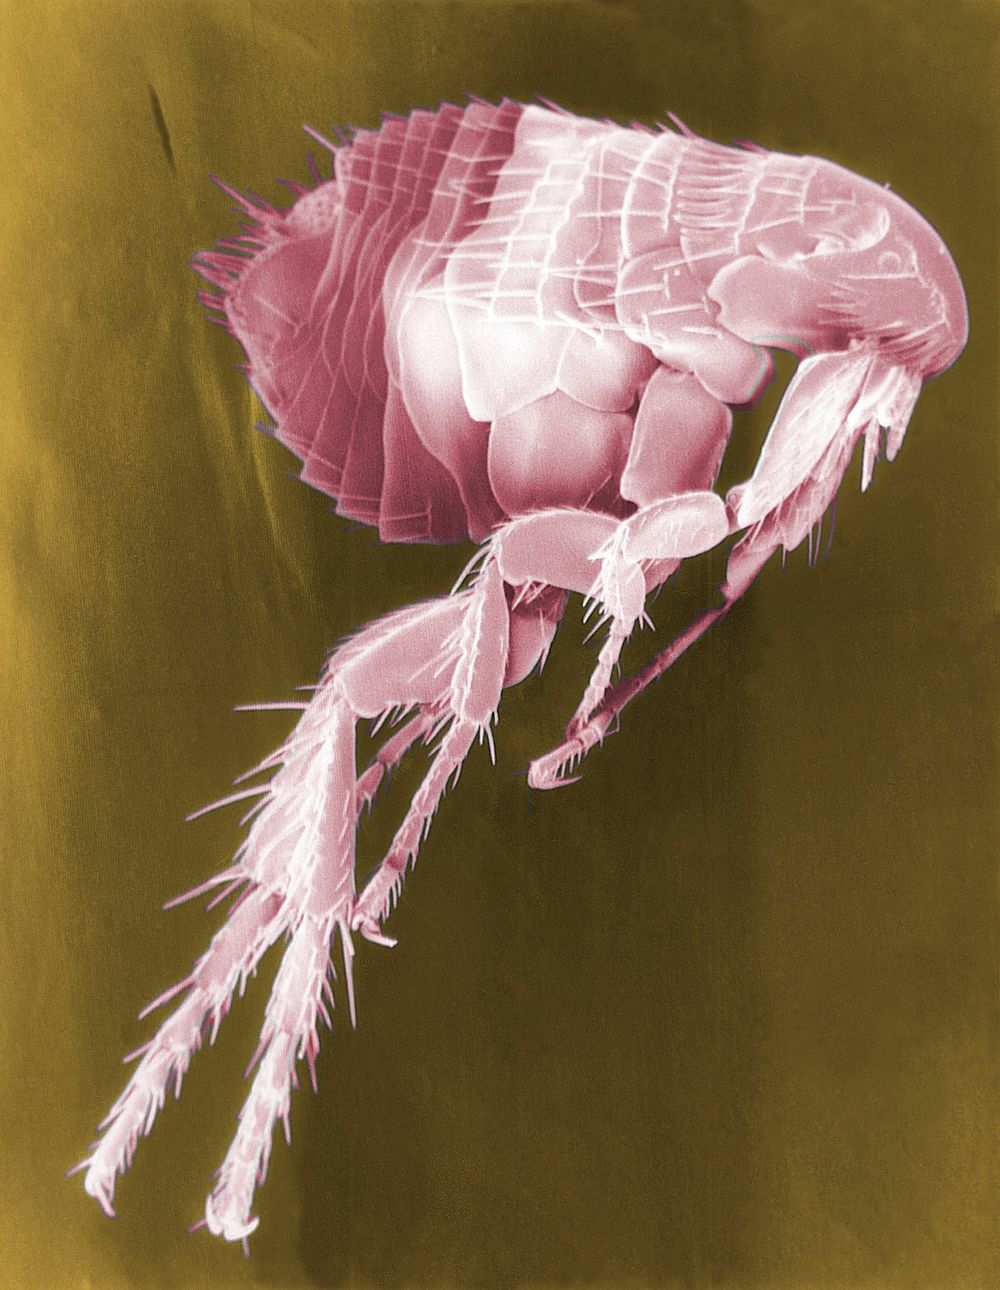 False colors Scanning Electron Micrograph of a Flea. Fleas are known to carry a number of diseases that are transferable to…